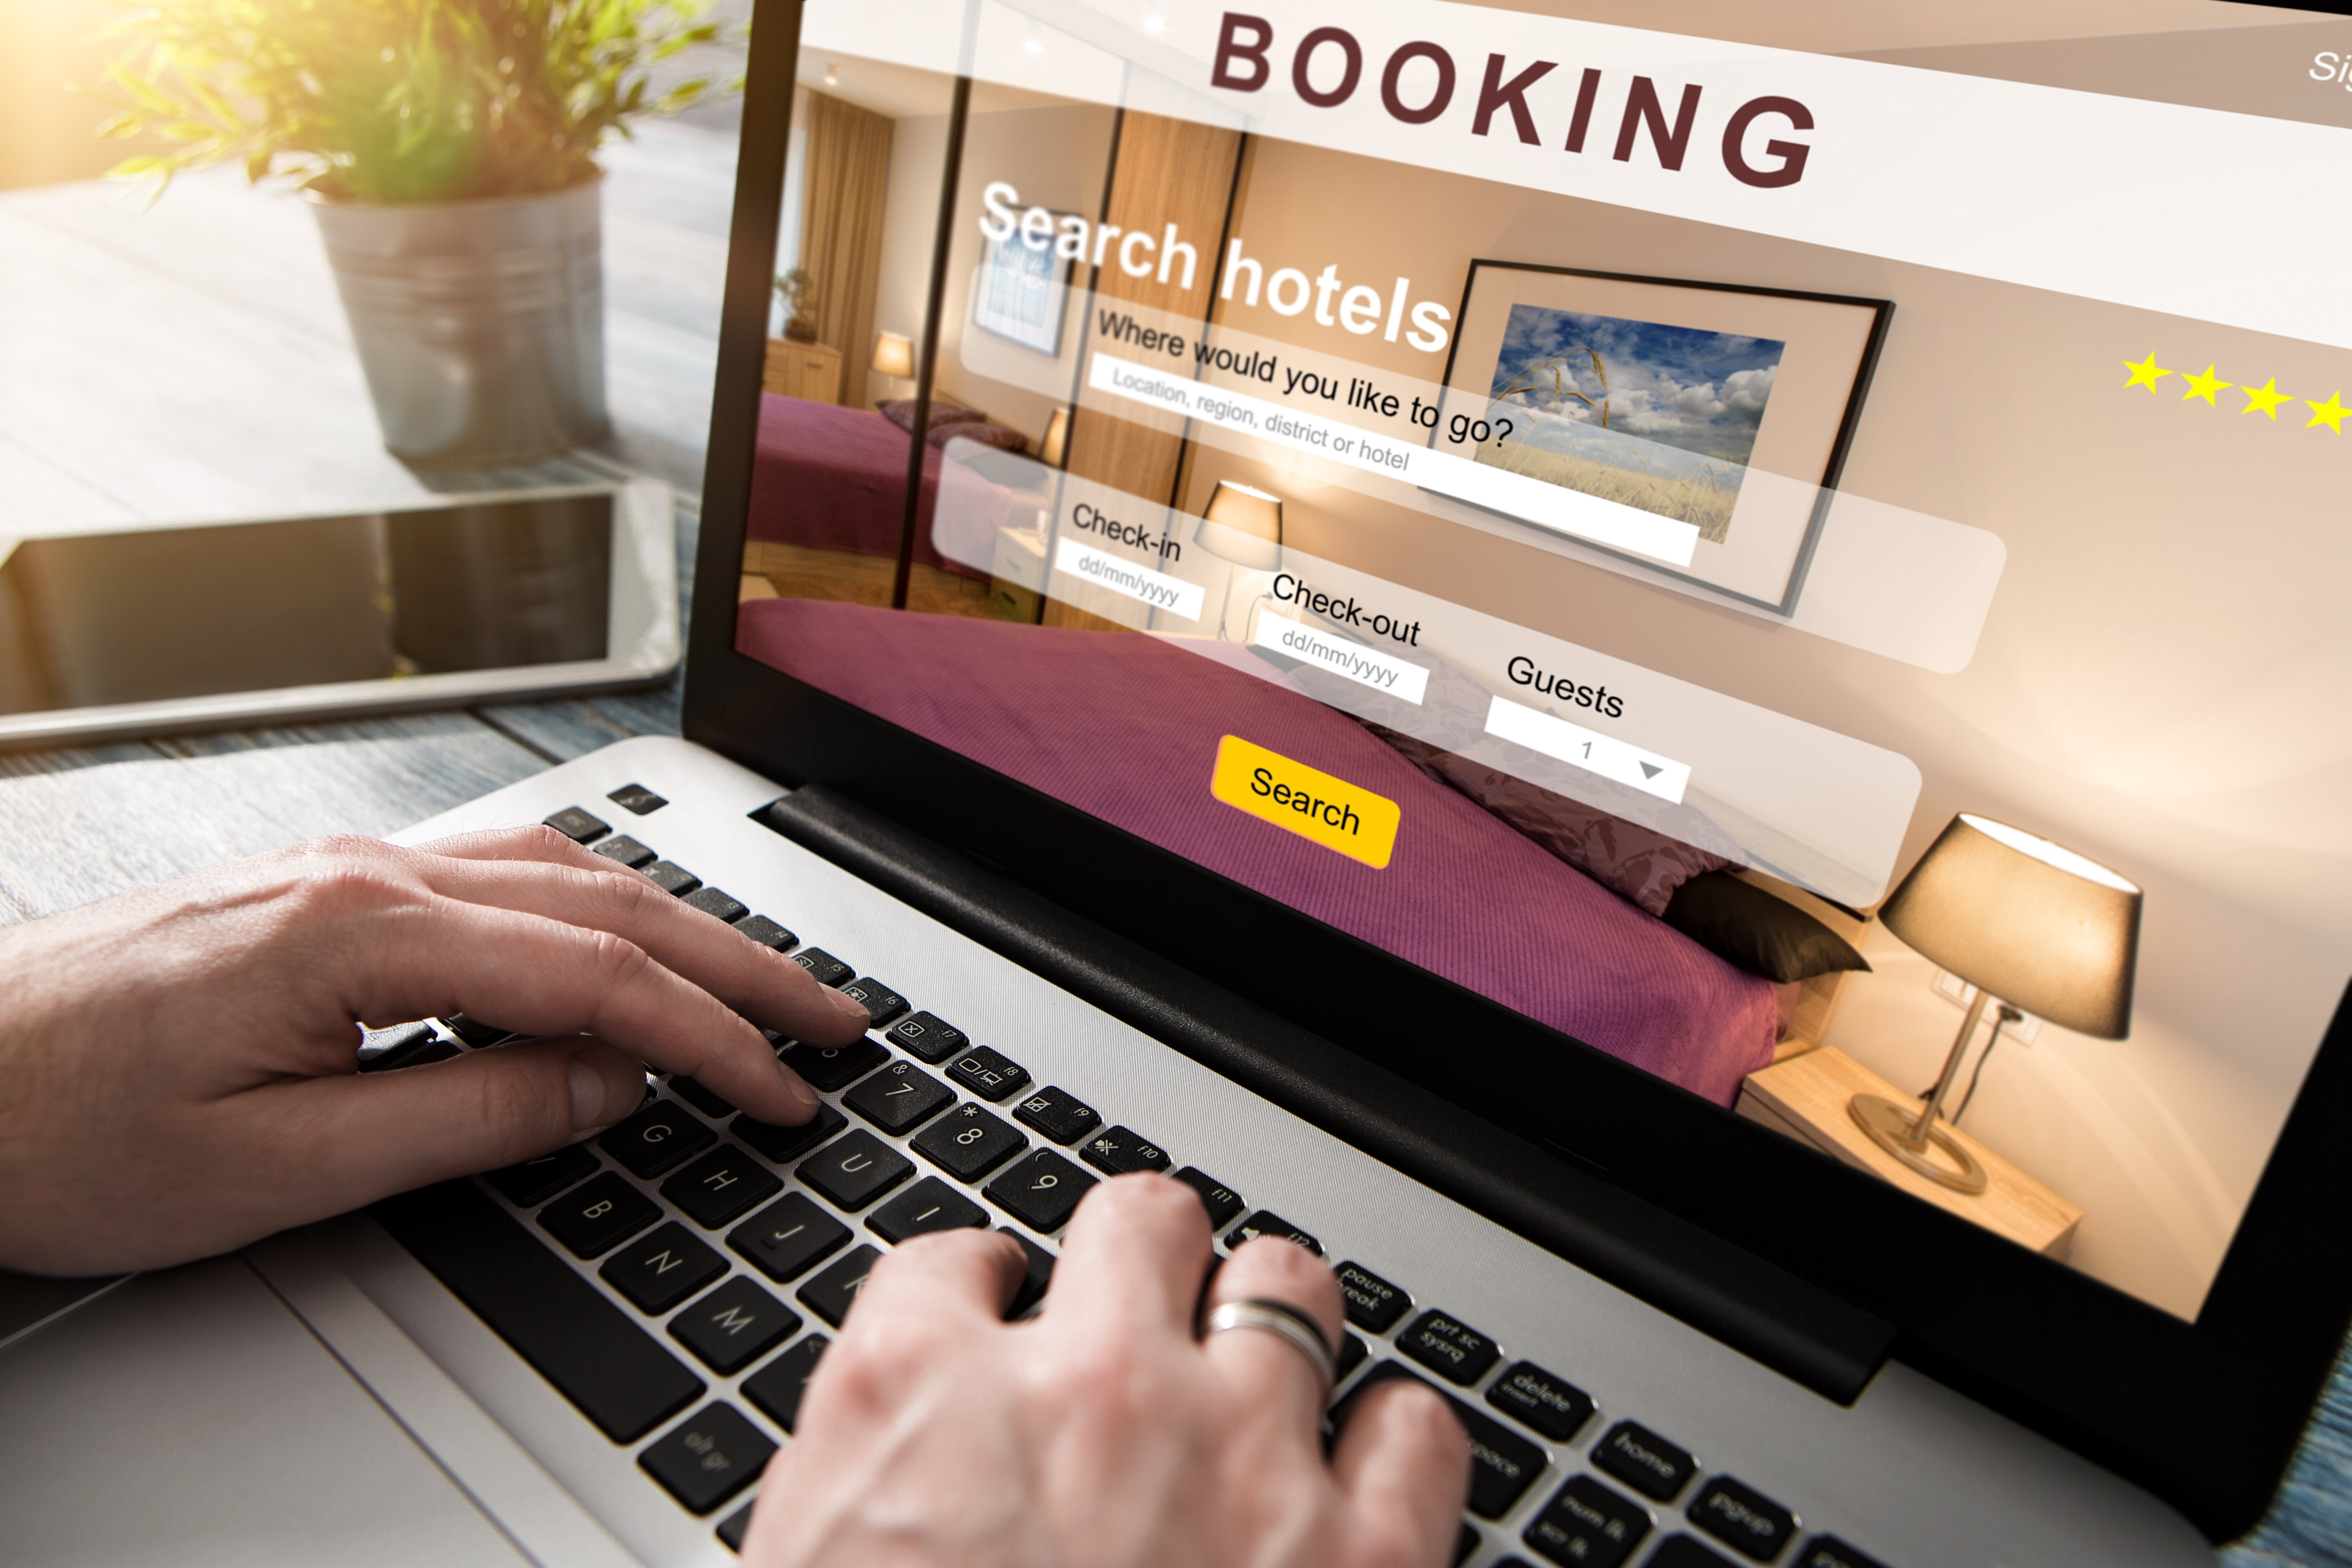 How to make hotel reservation information